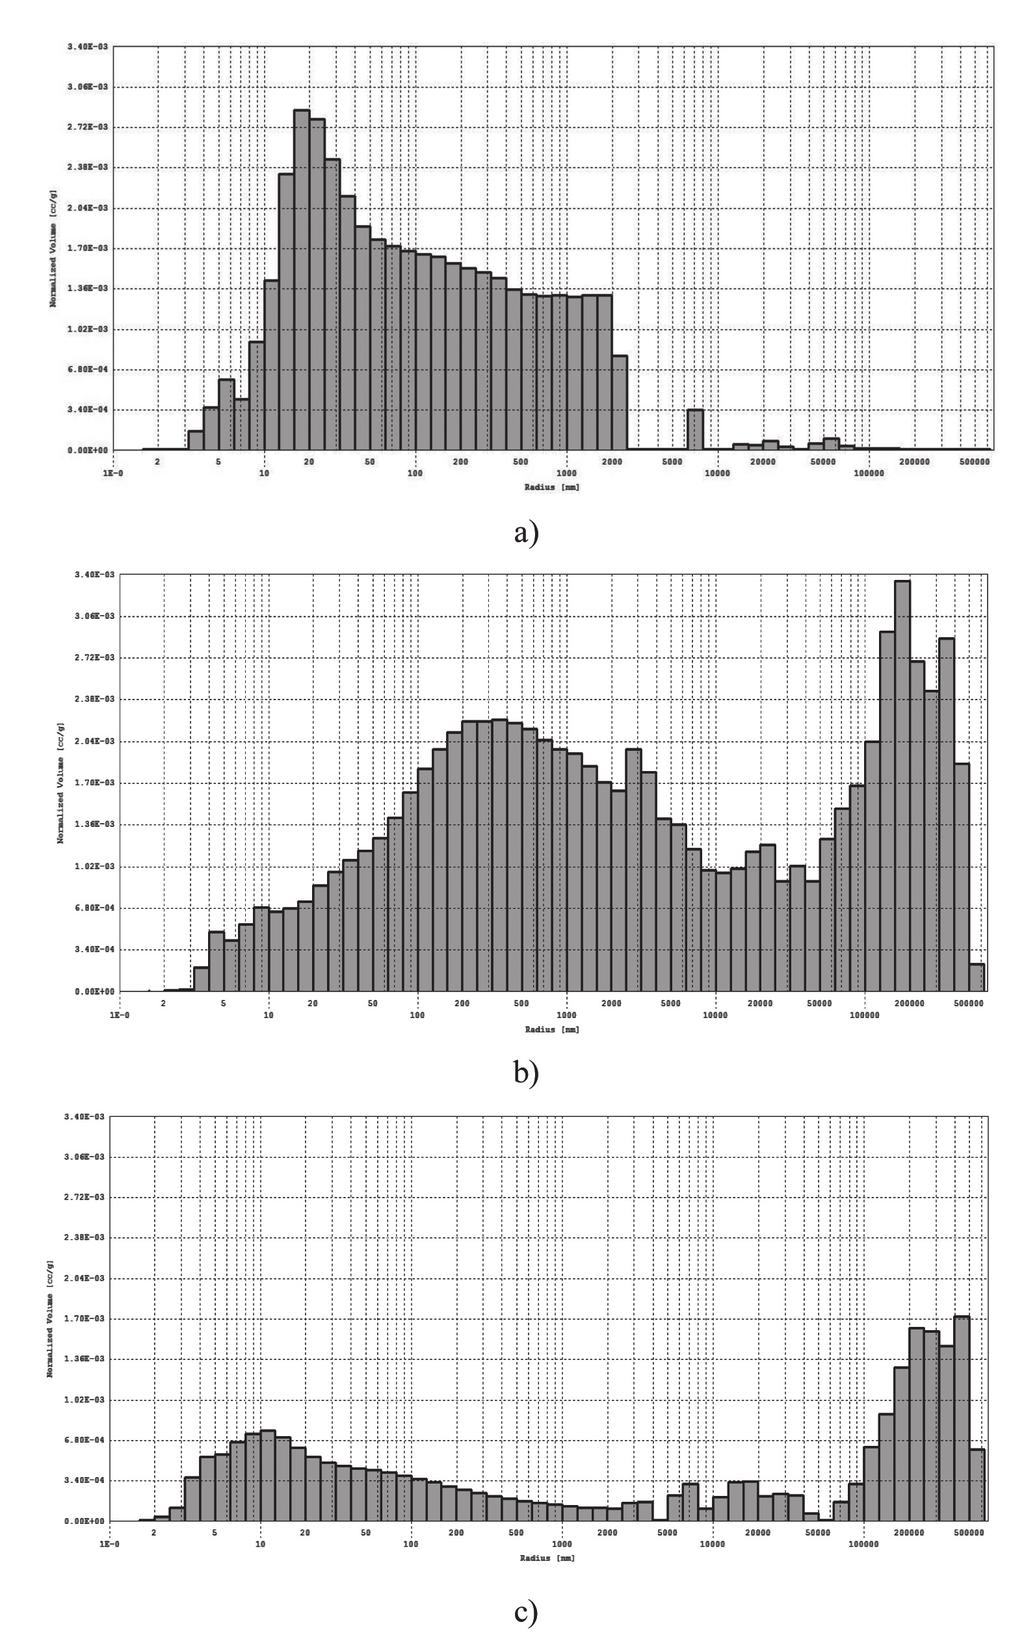 Fig. 6 Histogram of pore sizes vs. normalized volume for sandstone with: a) 16.69% effective porosity; b) 9.